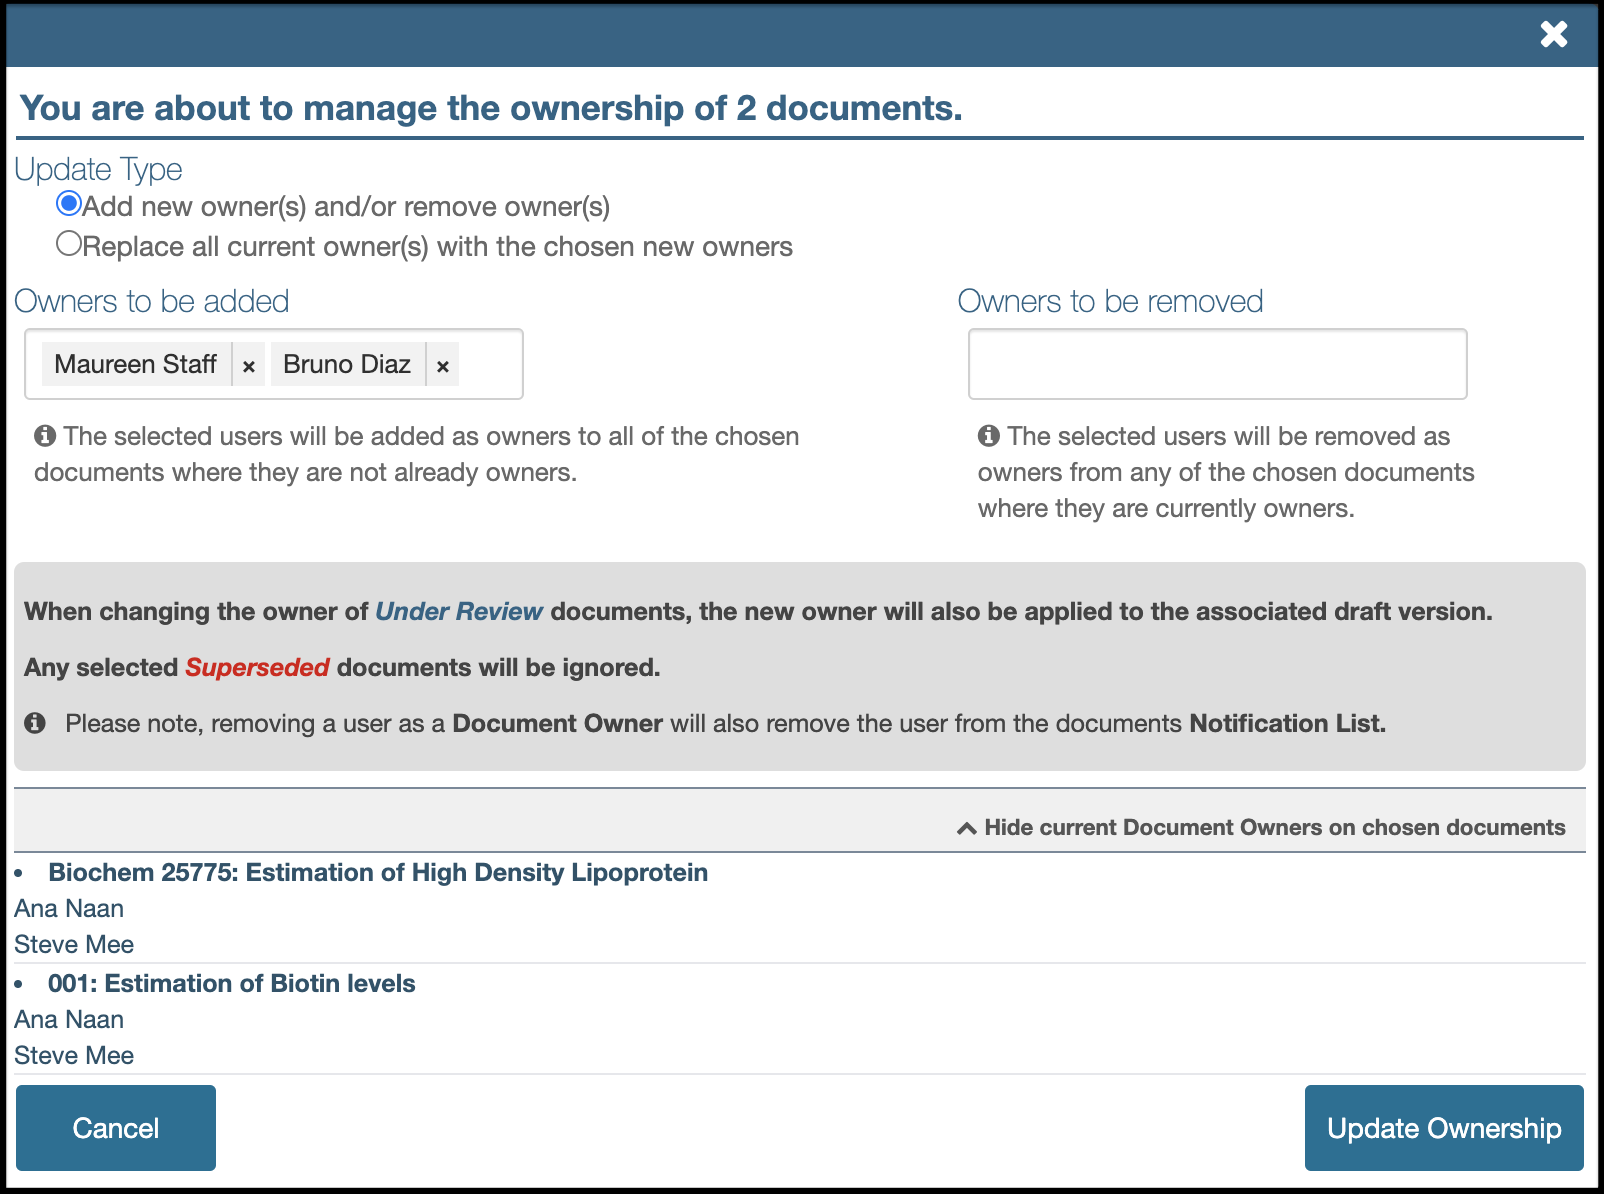 Image of the manage ownership Lightbox, expanded to display current document owners.